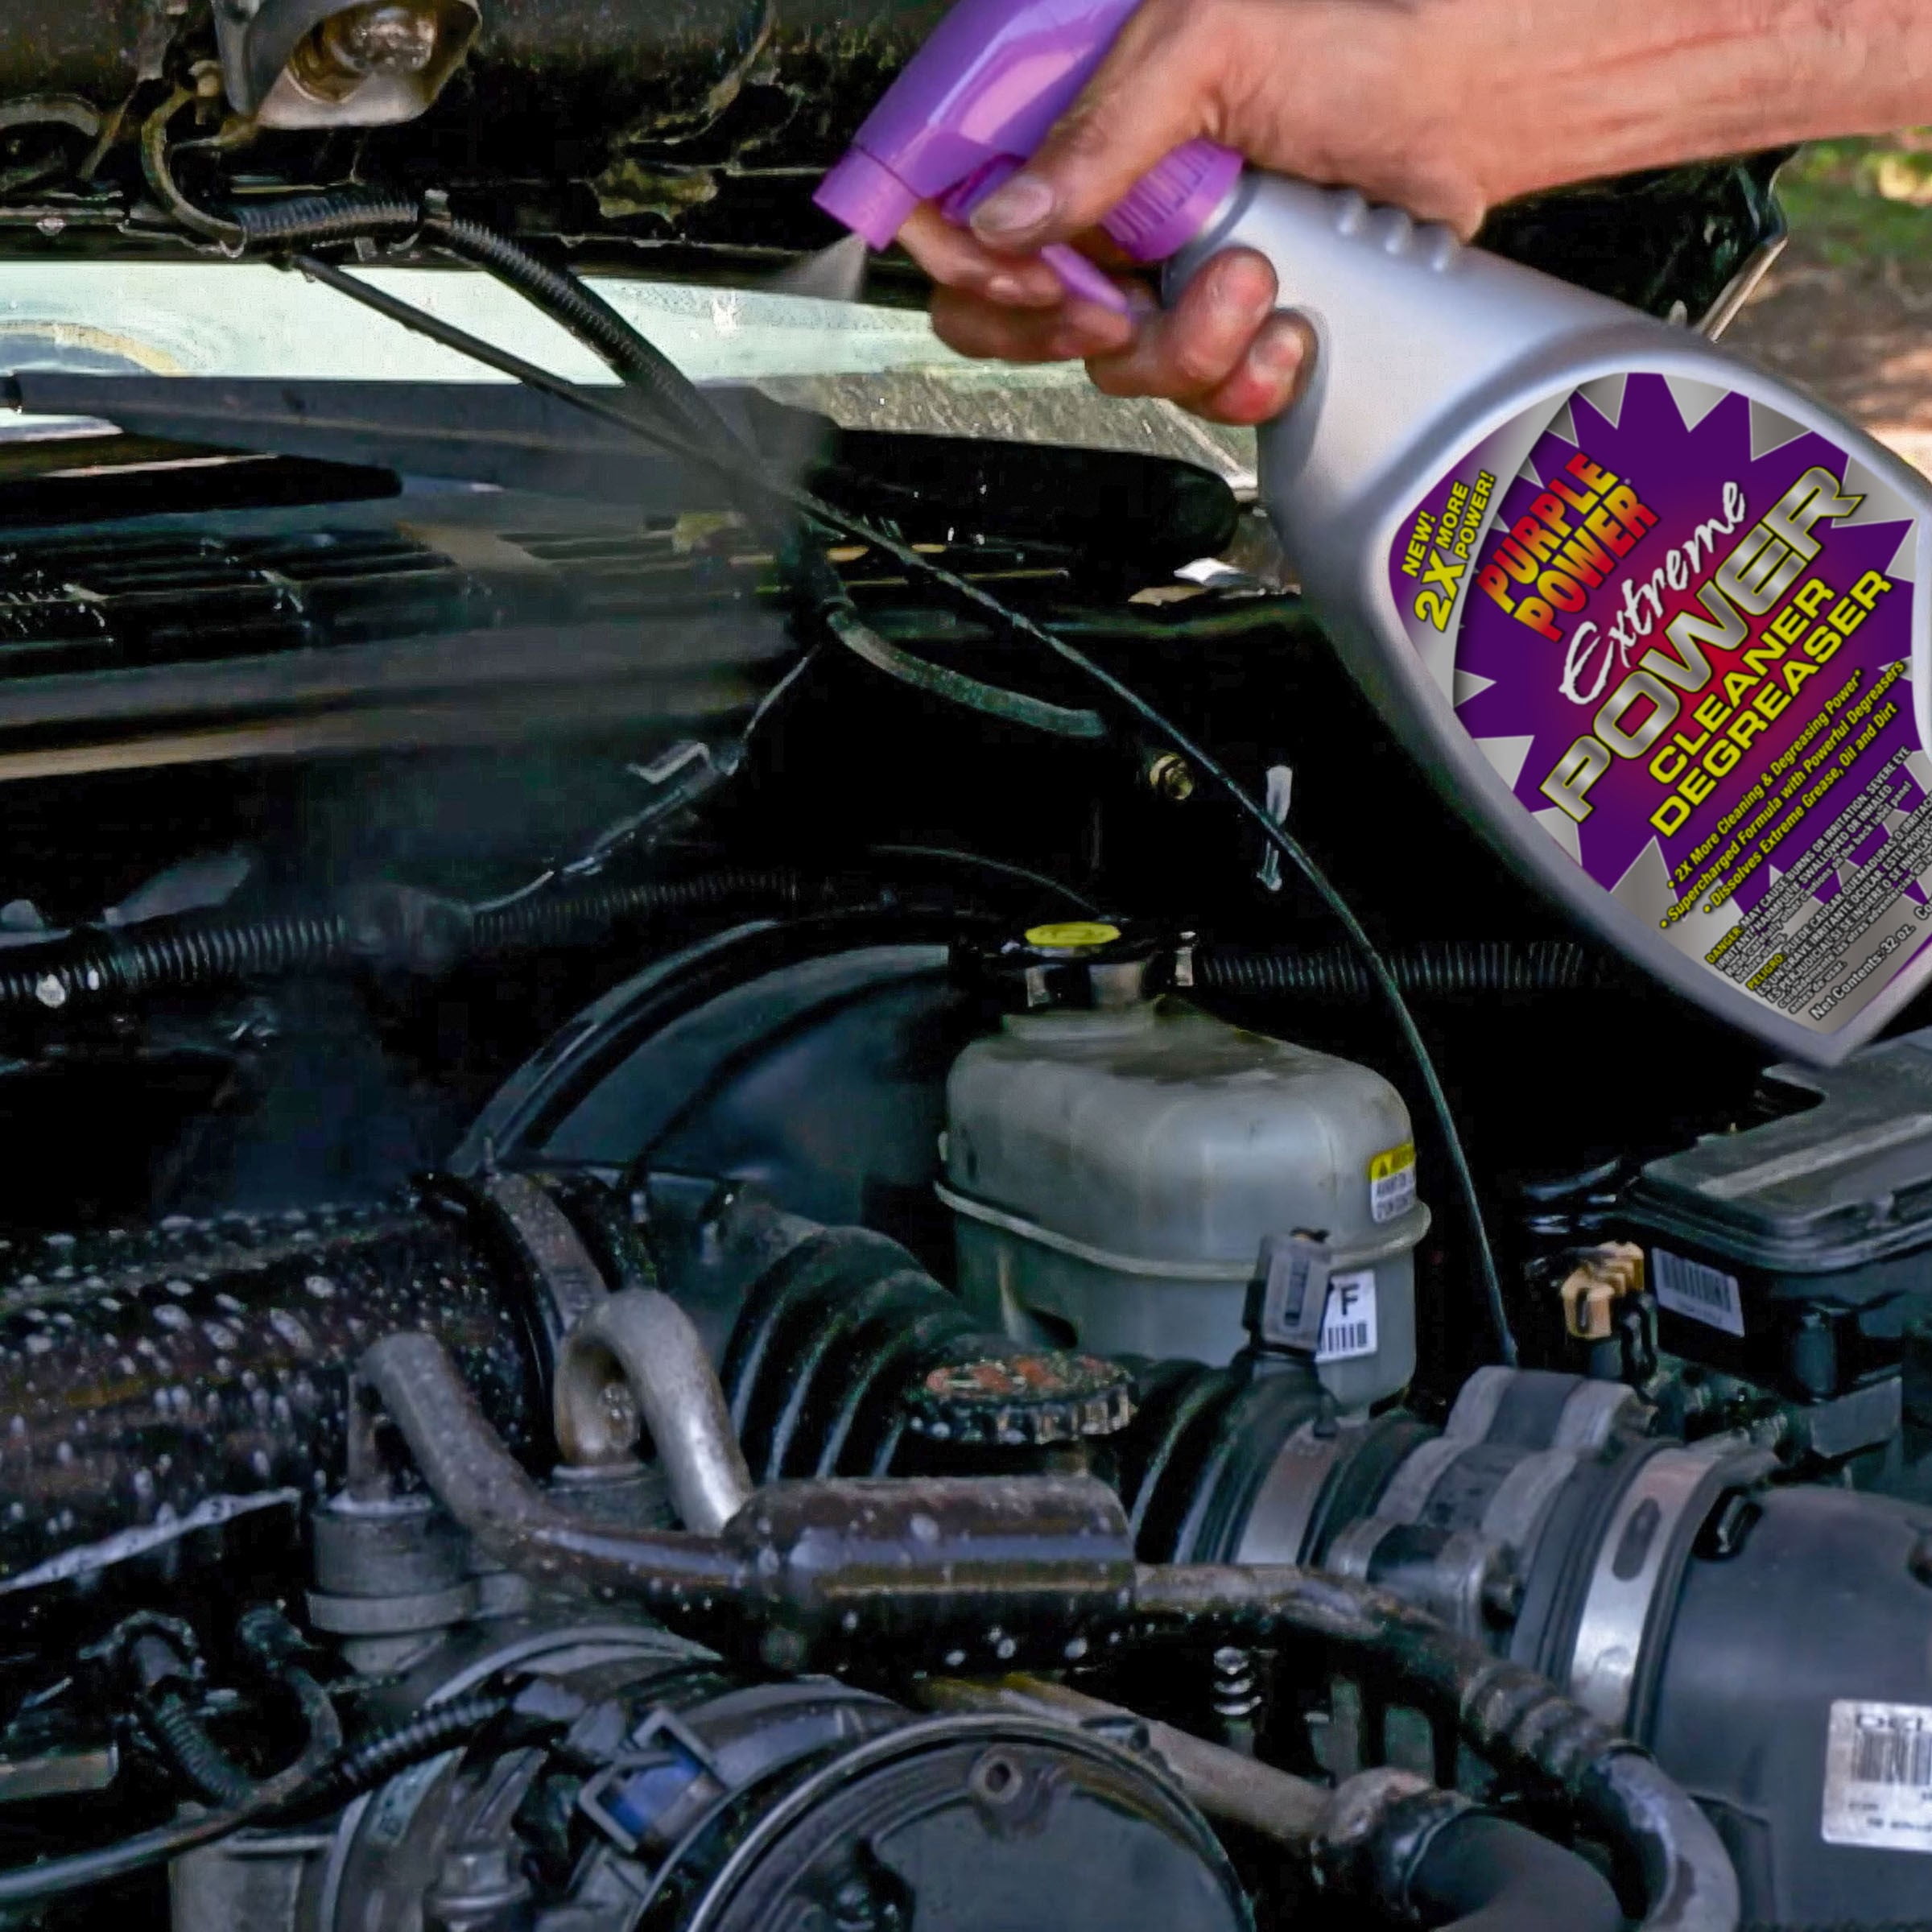 Purple Power (4320P) Industrial Strength Cleaner and Degreaser - 1 Gallon,  128 Fl Oz (Pack of 1)